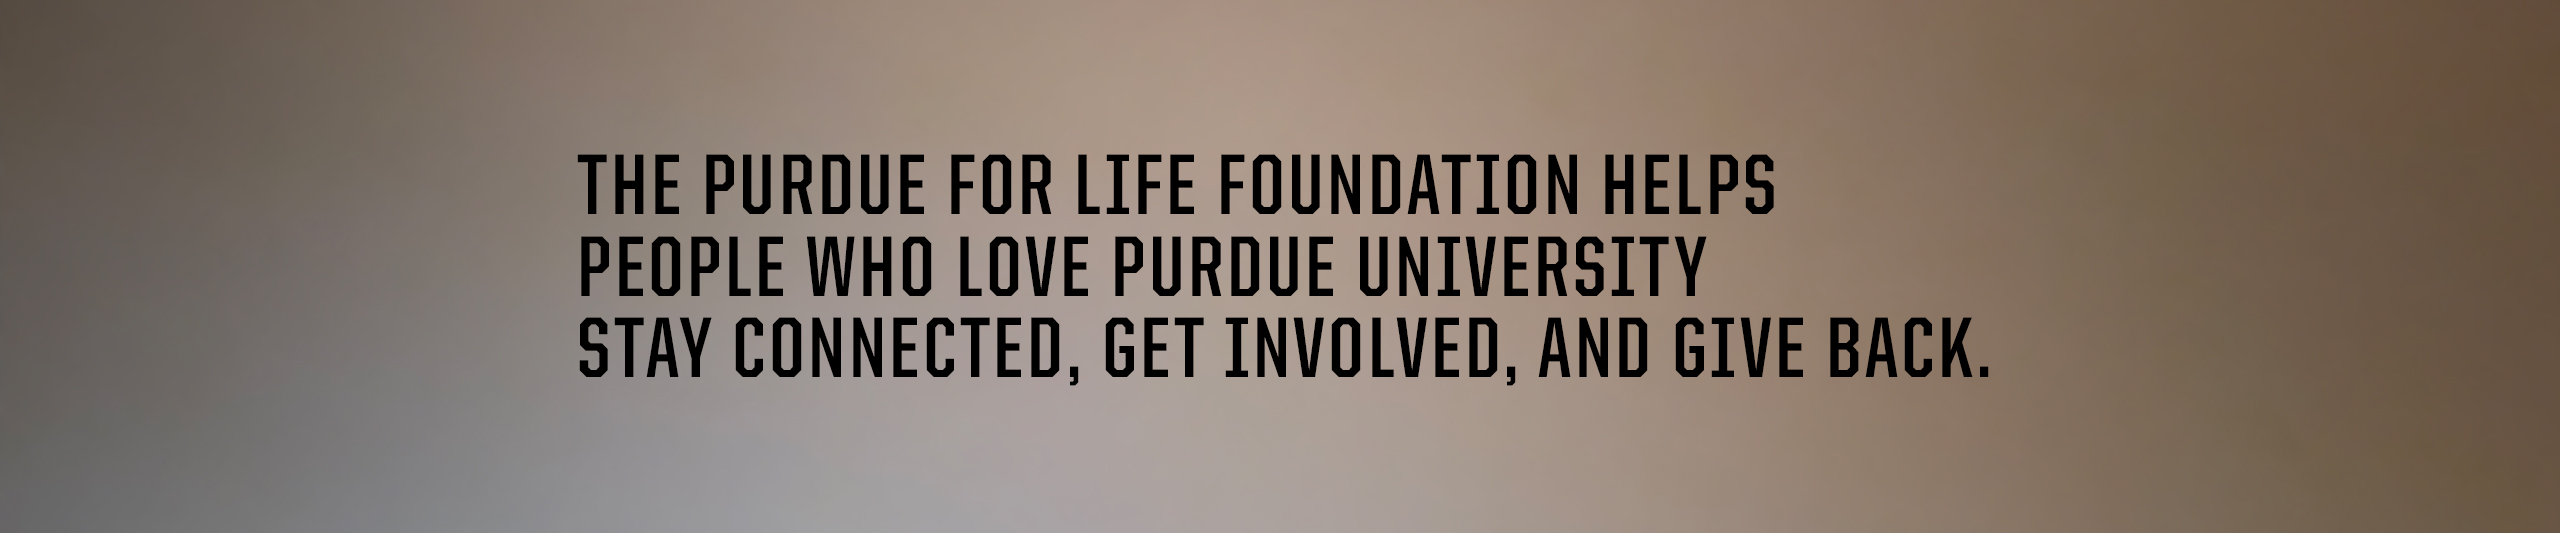 text on graphic reads "The Purdue for Life Foundation helps people who love Purdue University stay connected, get involved, and give back."